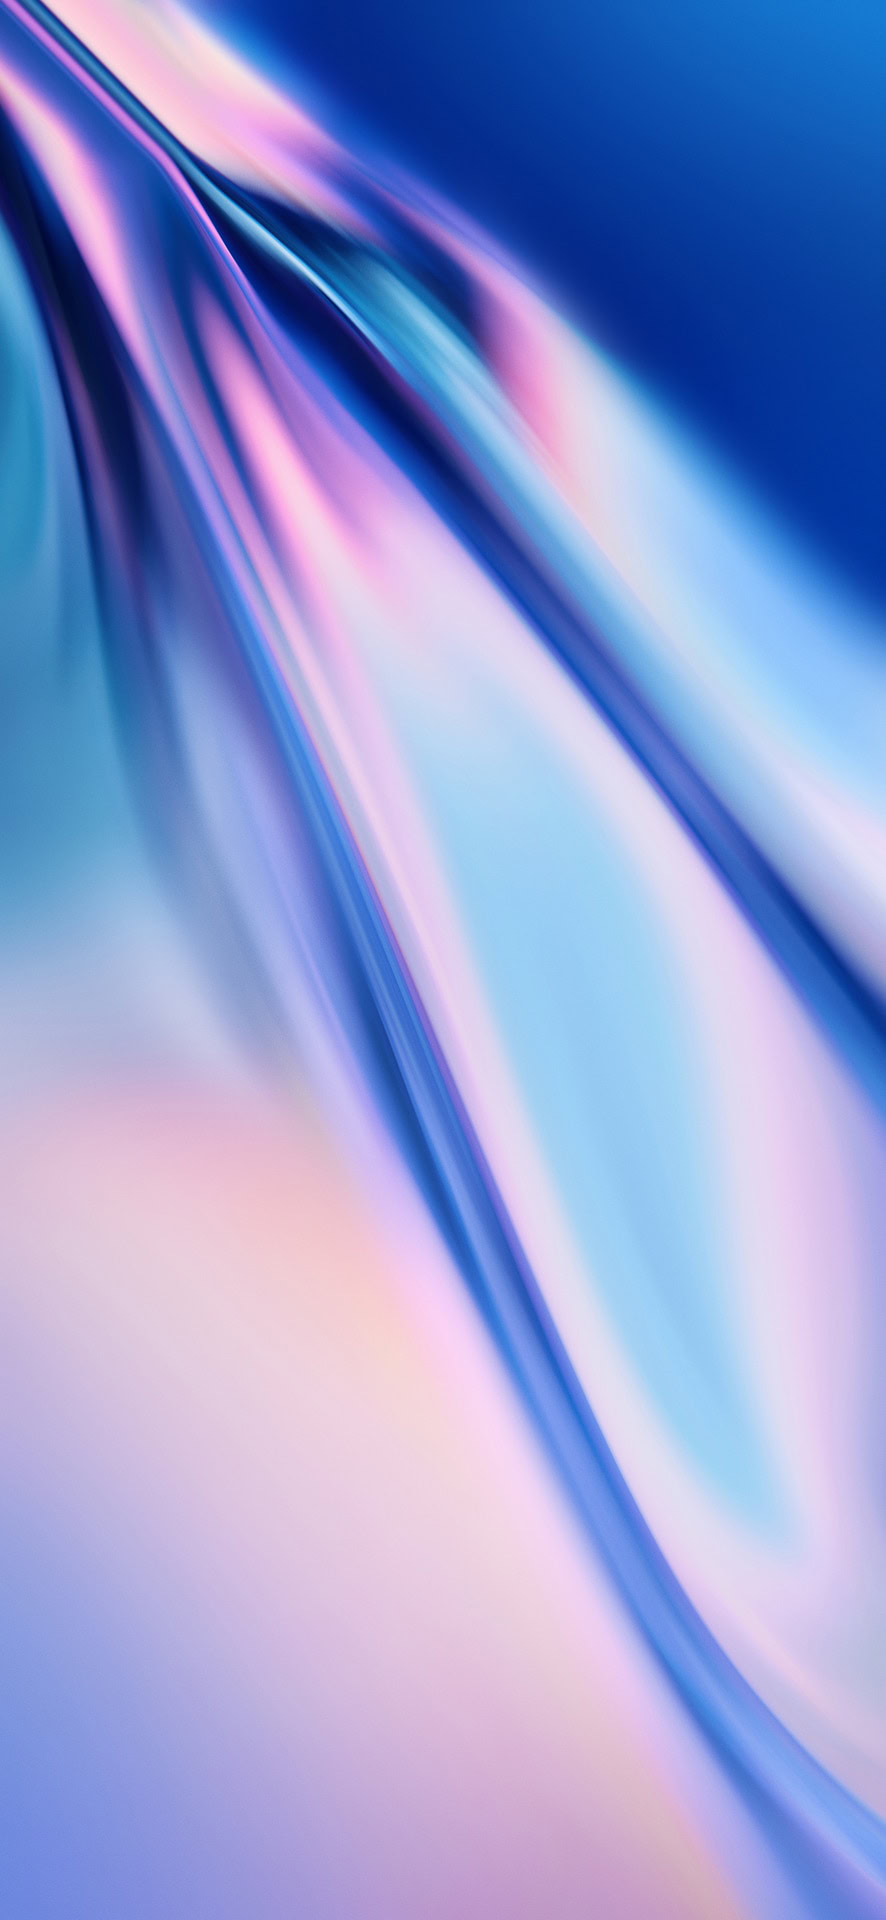 Download The Oneplus 7 Pro Wallpapers Here Android Authority